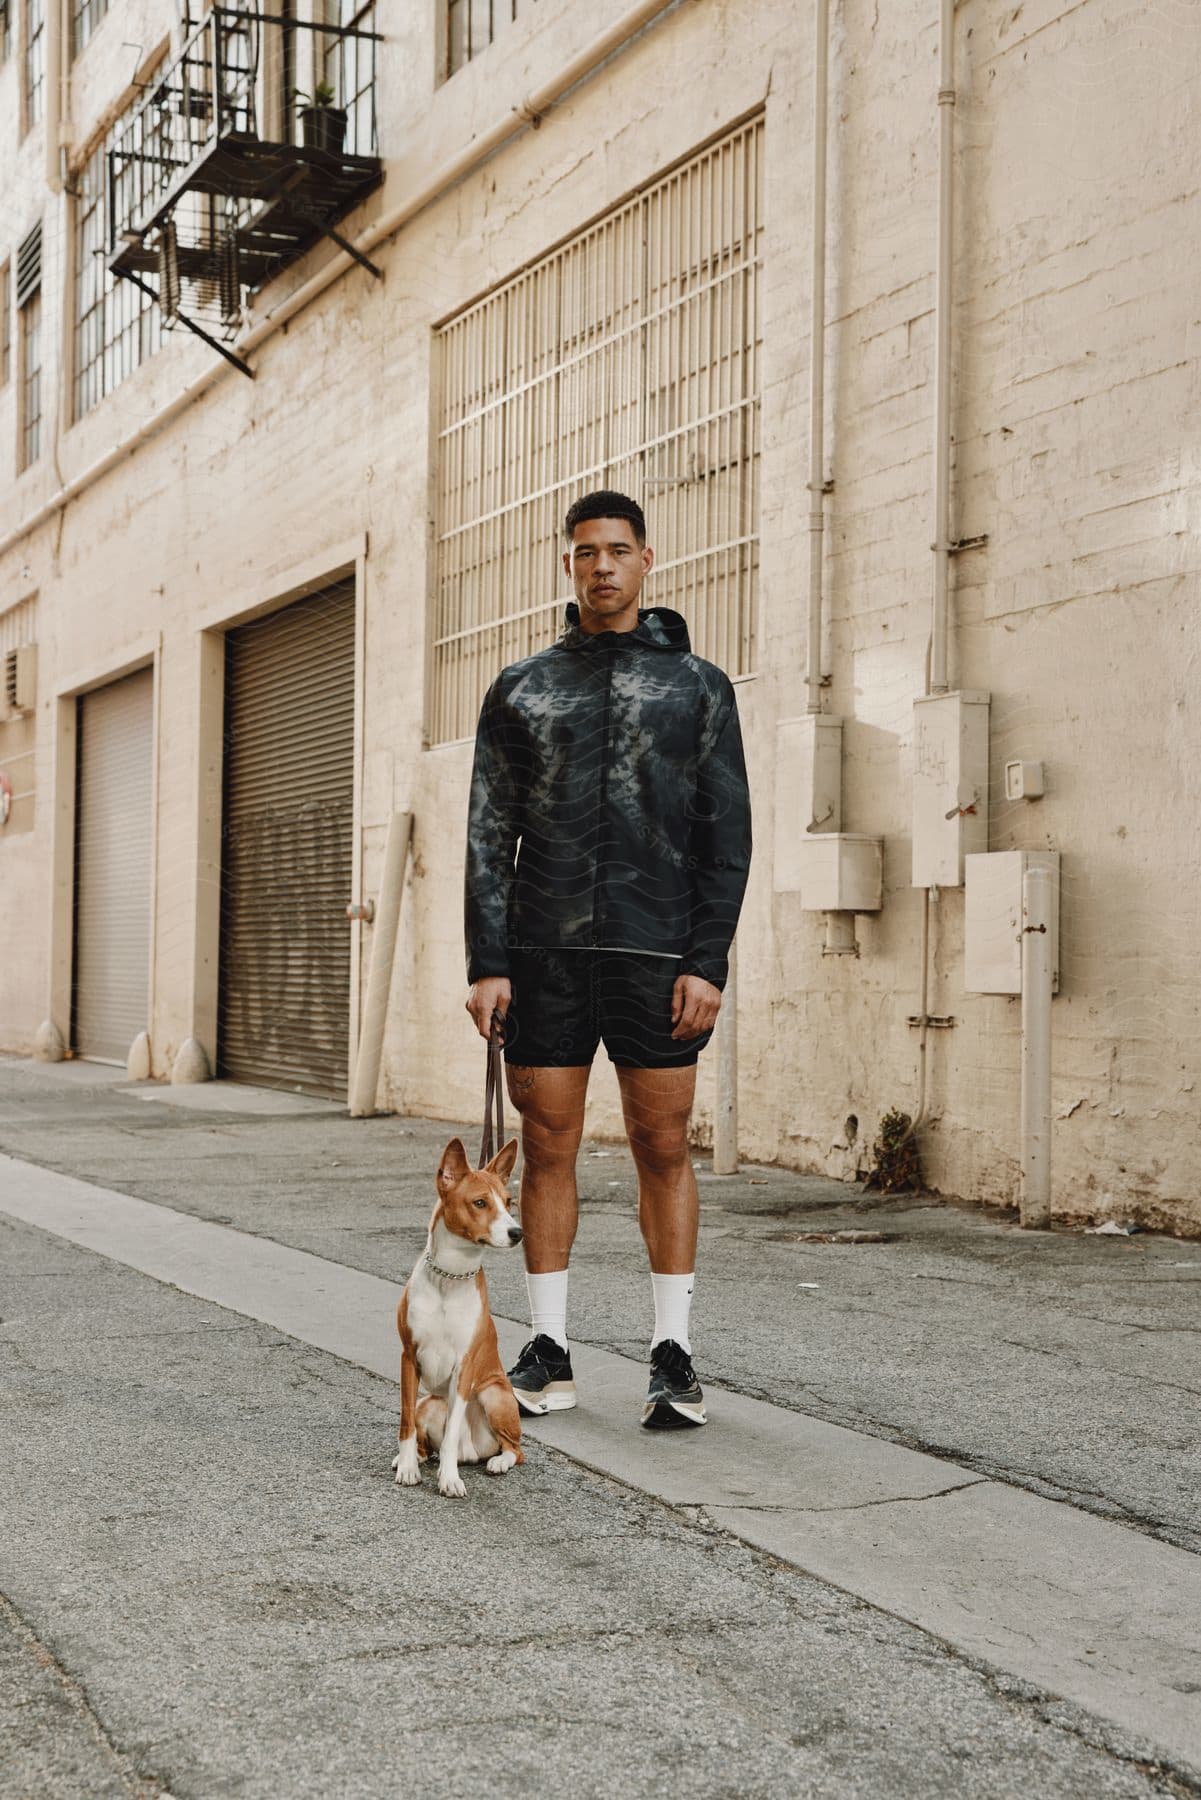 A person in a dark jacket and shorts stands with a dog on a leash in front of a building